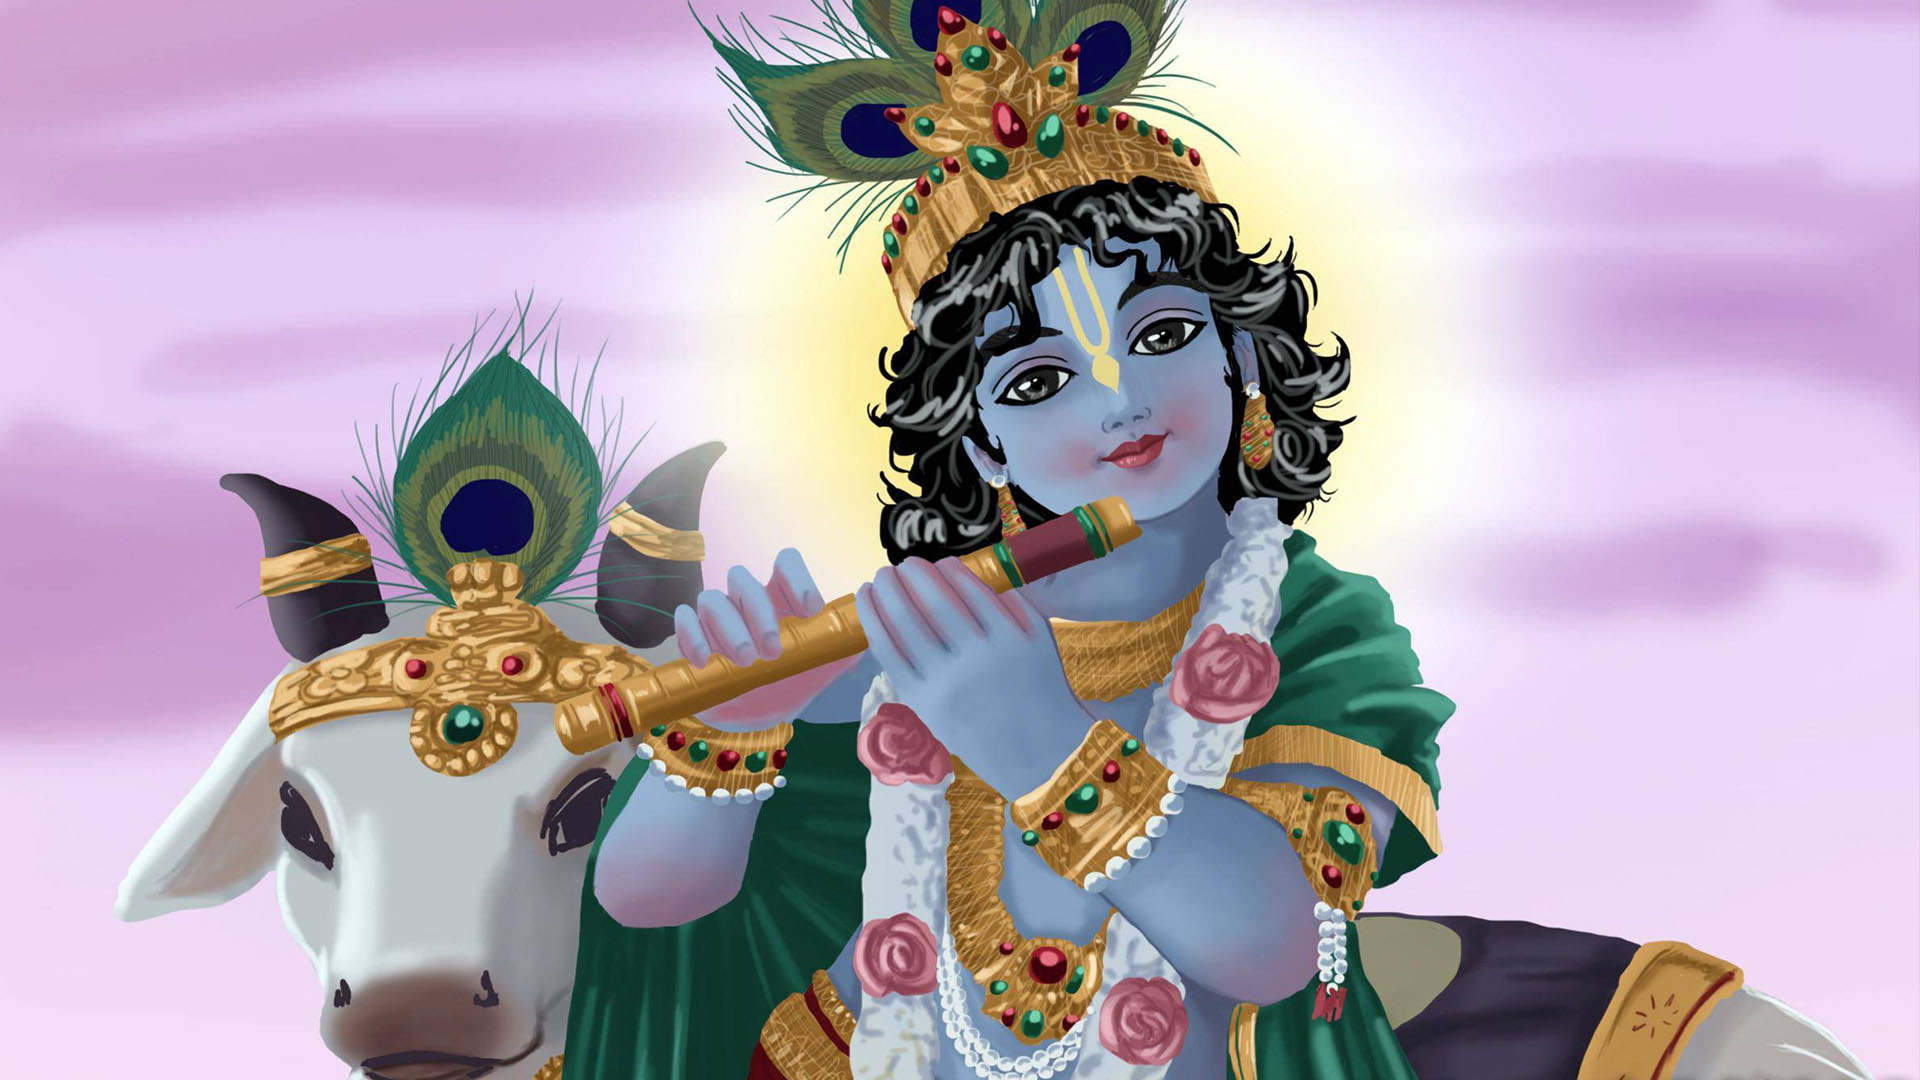 Little Krishna With Cow Images | Hindu Gods and Goddesses